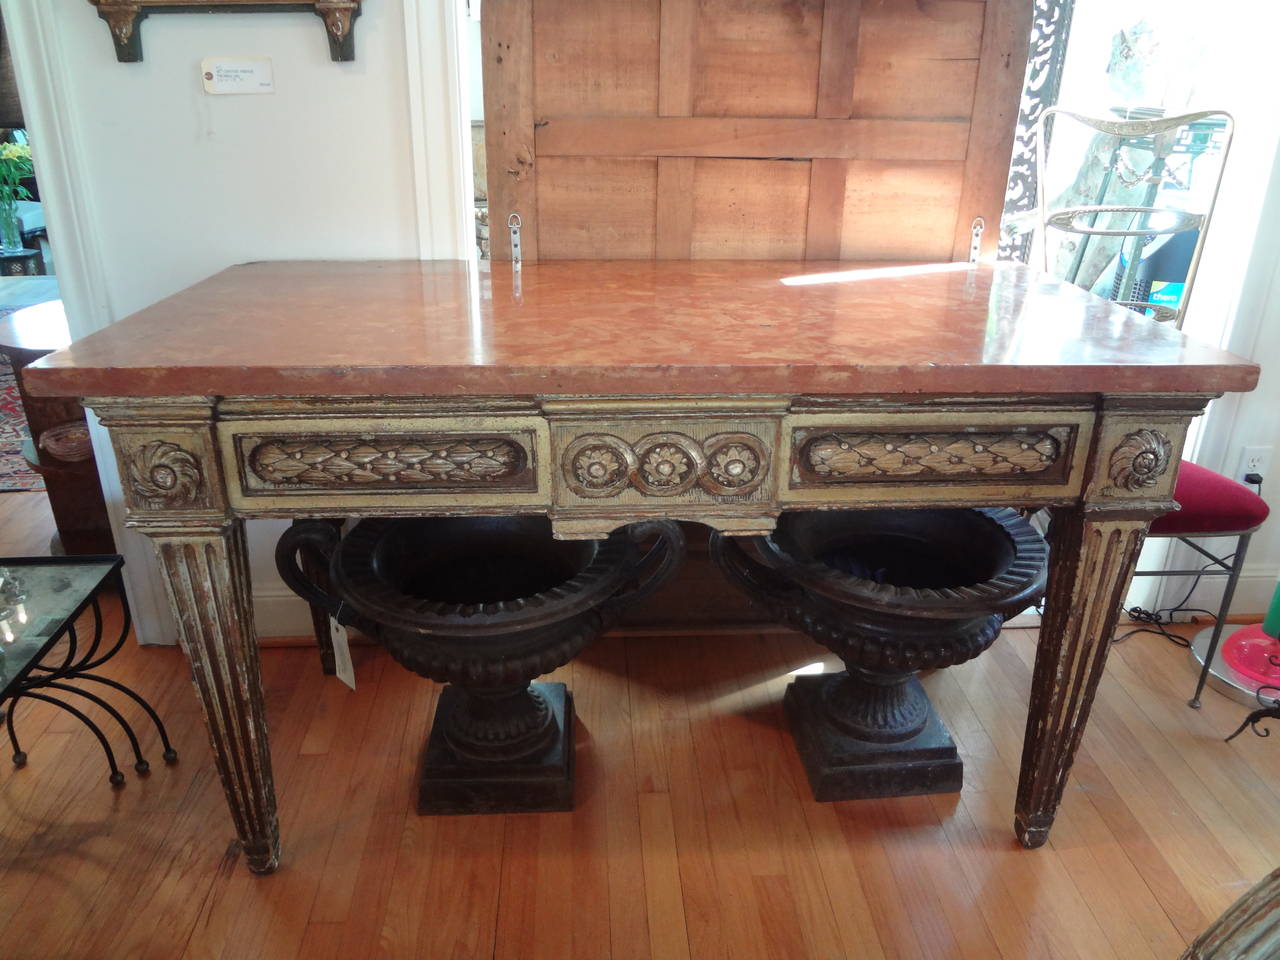 17th century Italian Neoclassical style gilt wood console table with marble top.
Sensational Italian Neoclassical style gilt wood console table or center table with 1.5 inch thick marble top from the 17th century. This magnificent antique Italian